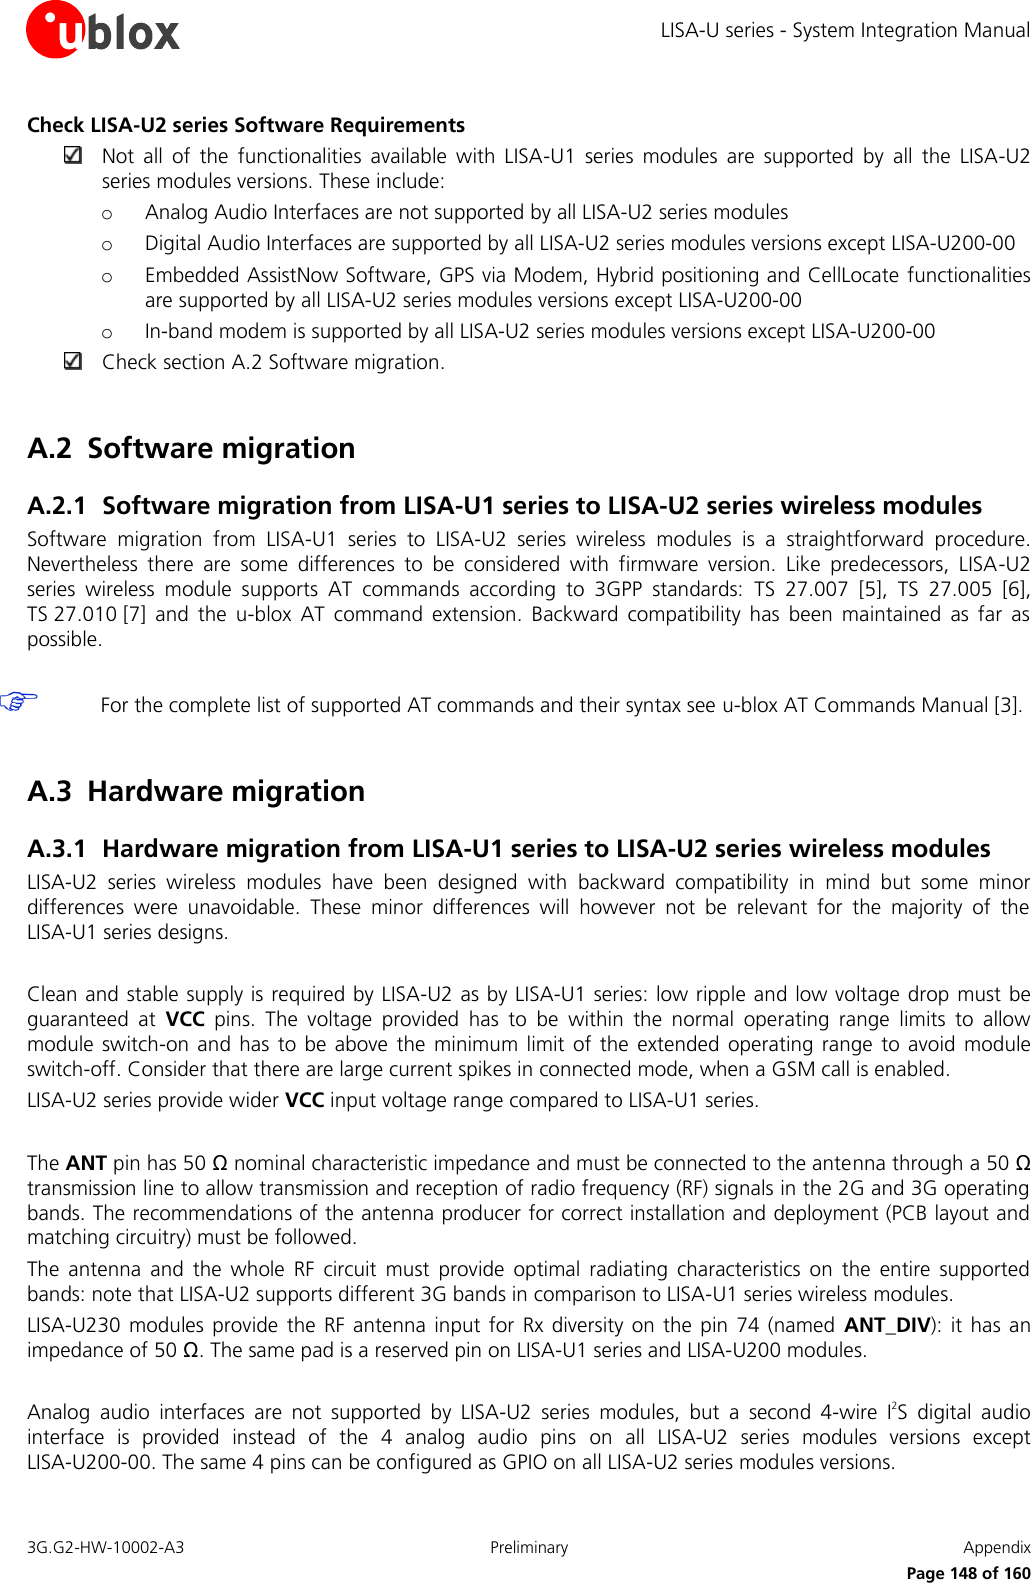 LISA-U series - System Integration Manual 3G.G2-HW-10002-A3  Preliminary  Appendix      Page 148 of 160 Check LISA-U2 series Software Requirements  Not  all  of  the  functionalities  available  with  LISA-U1  series  modules  are  supported  by  all  the  LISA-U2 series modules versions. These include: o Analog Audio Interfaces are not supported by all LISA-U2 series modules o Digital Audio Interfaces are supported by all LISA-U2 series modules versions except LISA-U200-00 o Embedded AssistNow Software, GPS via Modem, Hybrid positioning and CellLocate  functionalities are supported by all LISA-U2 series modules versions except LISA-U200-00 o In-band modem is supported by all LISA-U2 series modules versions except LISA-U200-00  Check section A.2 Software migration.  A.2 Software migration A.2.1 Software migration from LISA-U1 series to LISA-U2 series wireless modules Software  migration  from  LISA-U1  series  to  LISA-U2  series  wireless  modules  is  a  straightforward  procedure. Nevertheless  there  are  some  differences  to  be  considered  with  firmware  version.  Like  predecessors,  LISA-U2 series  wireless  module  supports  AT  commands  according  to  3GPP  standards:  TS  27.007 [5],  TS 27.005 [6], TS 27.010 [7]  and  the  u-blox  AT  command  extension.  Backward  compatibility  has  been  maintained  as  far  as possible.   For the complete list of supported AT commands and their syntax see u-blox AT Commands Manual [3].  A.3 Hardware migration A.3.1 Hardware migration from LISA-U1 series to LISA-U2 series wireless modules LISA-U2  series  wireless  modules  have  been  designed  with  backward  compatibility  in  mind  but  some  minor differences  were  unavoidable.  These  minor  differences  will  however  not  be  relevant  for  the  majority  of  the LISA-U1 series designs.  Clean and stable supply is required by LISA-U2 as by LISA-U1 series: low ripple and low voltage drop  must  be guaranteed  at  VCC  pins.  The  voltage  provided  has  to  be  within  the  normal  operating  range  limits  to  allow module switch-on  and has  to be  above  the  minimum limit  of the  extended  operating  range  to avoid  module switch-off. Consider that there are large current spikes in connected mode, when a GSM call is enabled. LISA-U2 series provide wider VCC input voltage range compared to LISA-U1 series.  The ANT pin has 50 Ω nominal characteristic impedance and must be connected to the antenna through a 50 Ω transmission line to allow transmission and reception of radio frequency (RF) signals in the 2G and 3G operating bands. The recommendations of the antenna producer for correct installation and deployment (PCB layout and matching circuitry) must be followed. The  antenna  and  the  whole  RF  circuit  must  provide  optimal  radiating  characteristics  on  the  entire  supported bands: note that LISA-U2 supports different 3G bands in comparison to LISA-U1 series wireless modules. LISA-U230  modules provide  the RF  antenna  input for  Rx diversity on  the pin  74 (named  ANT_DIV): it  has an impedance of 50 Ω. The same pad is a reserved pin on LISA-U1 series and LISA-U200 modules.  Analog  audio  interfaces  are  not  supported  by  LISA-U2  series  modules,  but  a  second  4-wire  I2S  digital  audio interface  is  provided  instead  of  the  4  analog  audio  pins  on  all  LISA-U2  series  modules  versions  except LISA-U200-00. The same 4 pins can be configured as GPIO on all LISA-U2 series modules versions. 